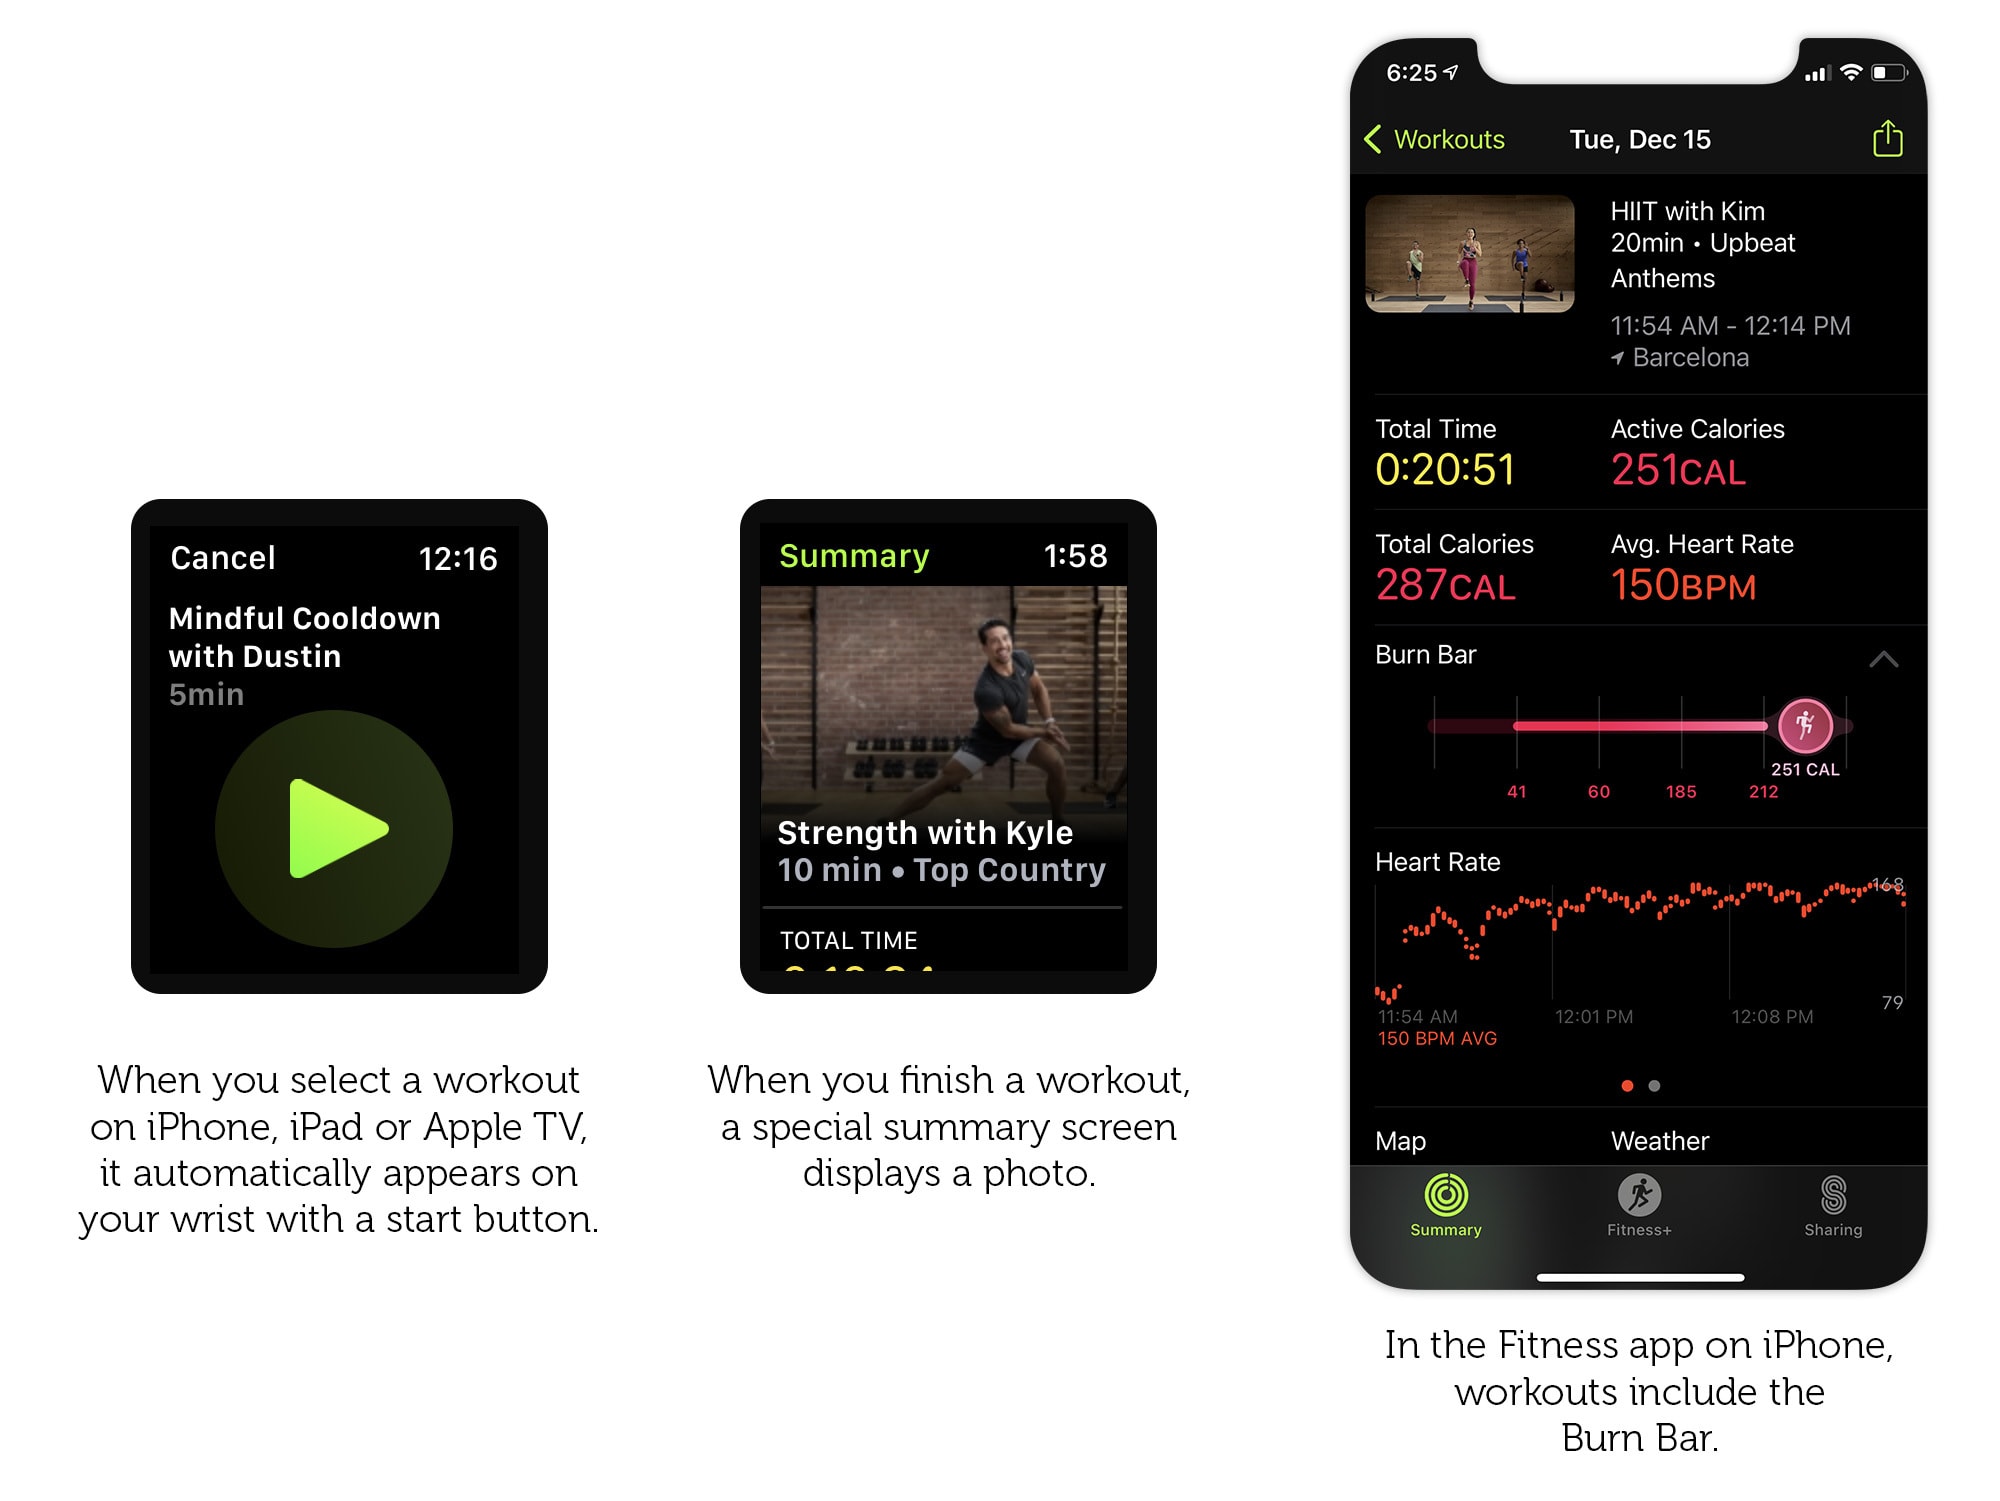 Apple Fitness+ is tightly integrated with Apple Watch and the Fitness app.